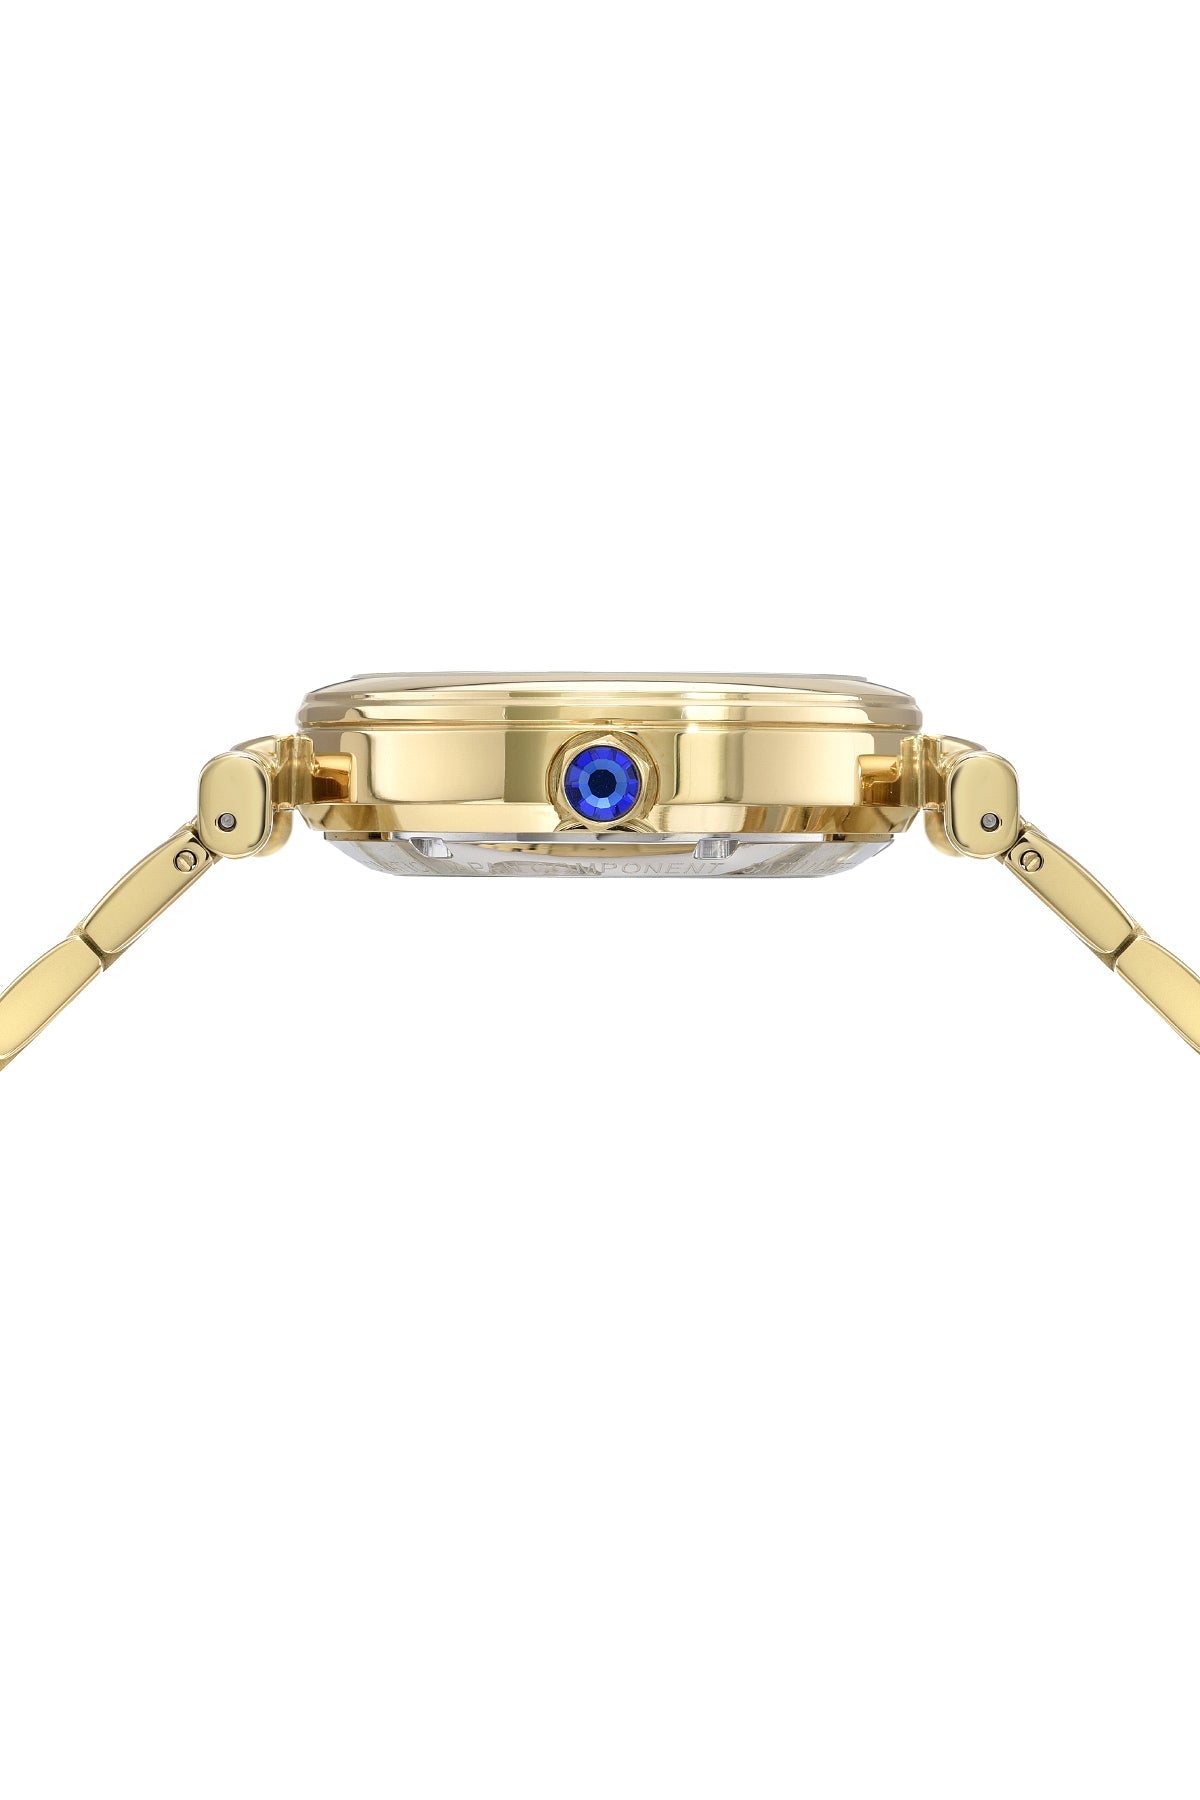 Porsamo Bleu Colette Luxury Automatic Women's Stainless Steel Watch, Gold 1101BCOS